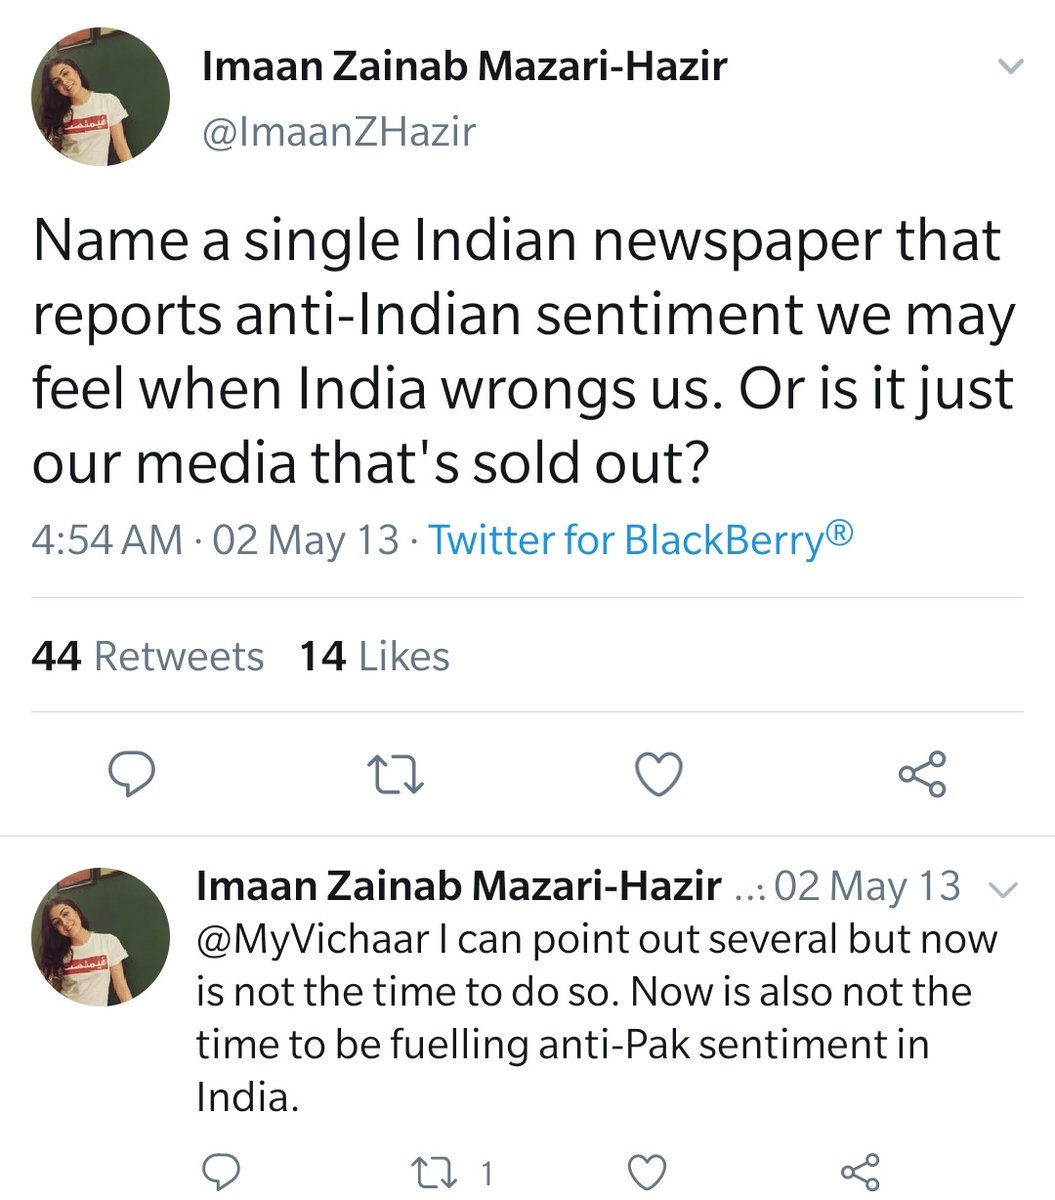 As per Imaan Mazari:1/ Media anchors are agenda-driven.2/ Pak Media is funded & controlled by India3/ No newspaper in India bash their own country but in Pak media is sold out.